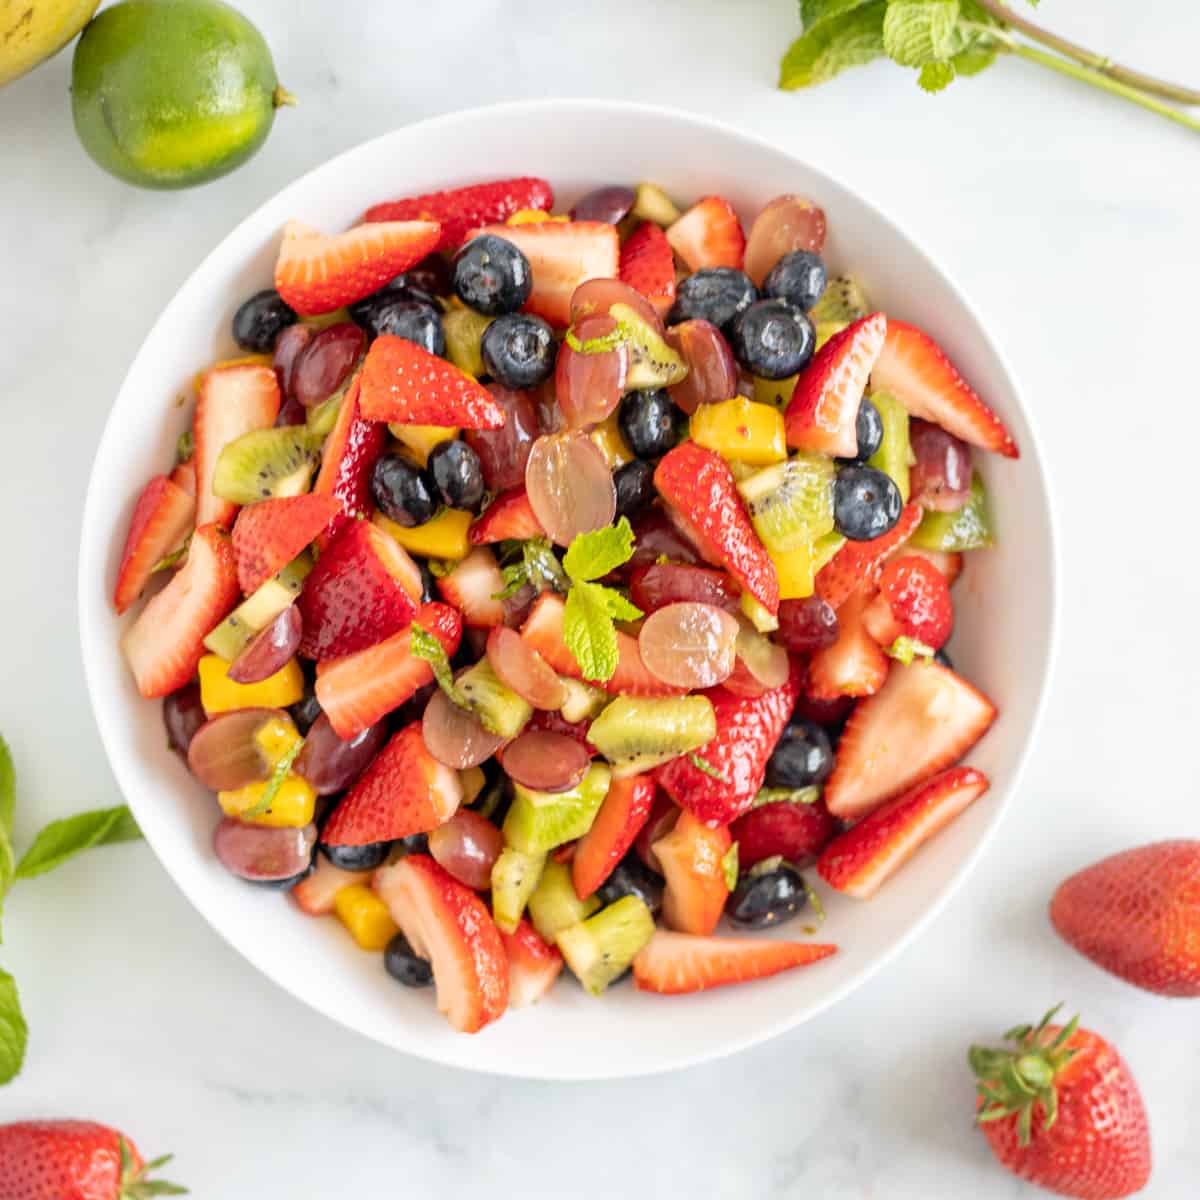 The Best Fruit Salad with Honey-Lime Dressing - Just a Taste